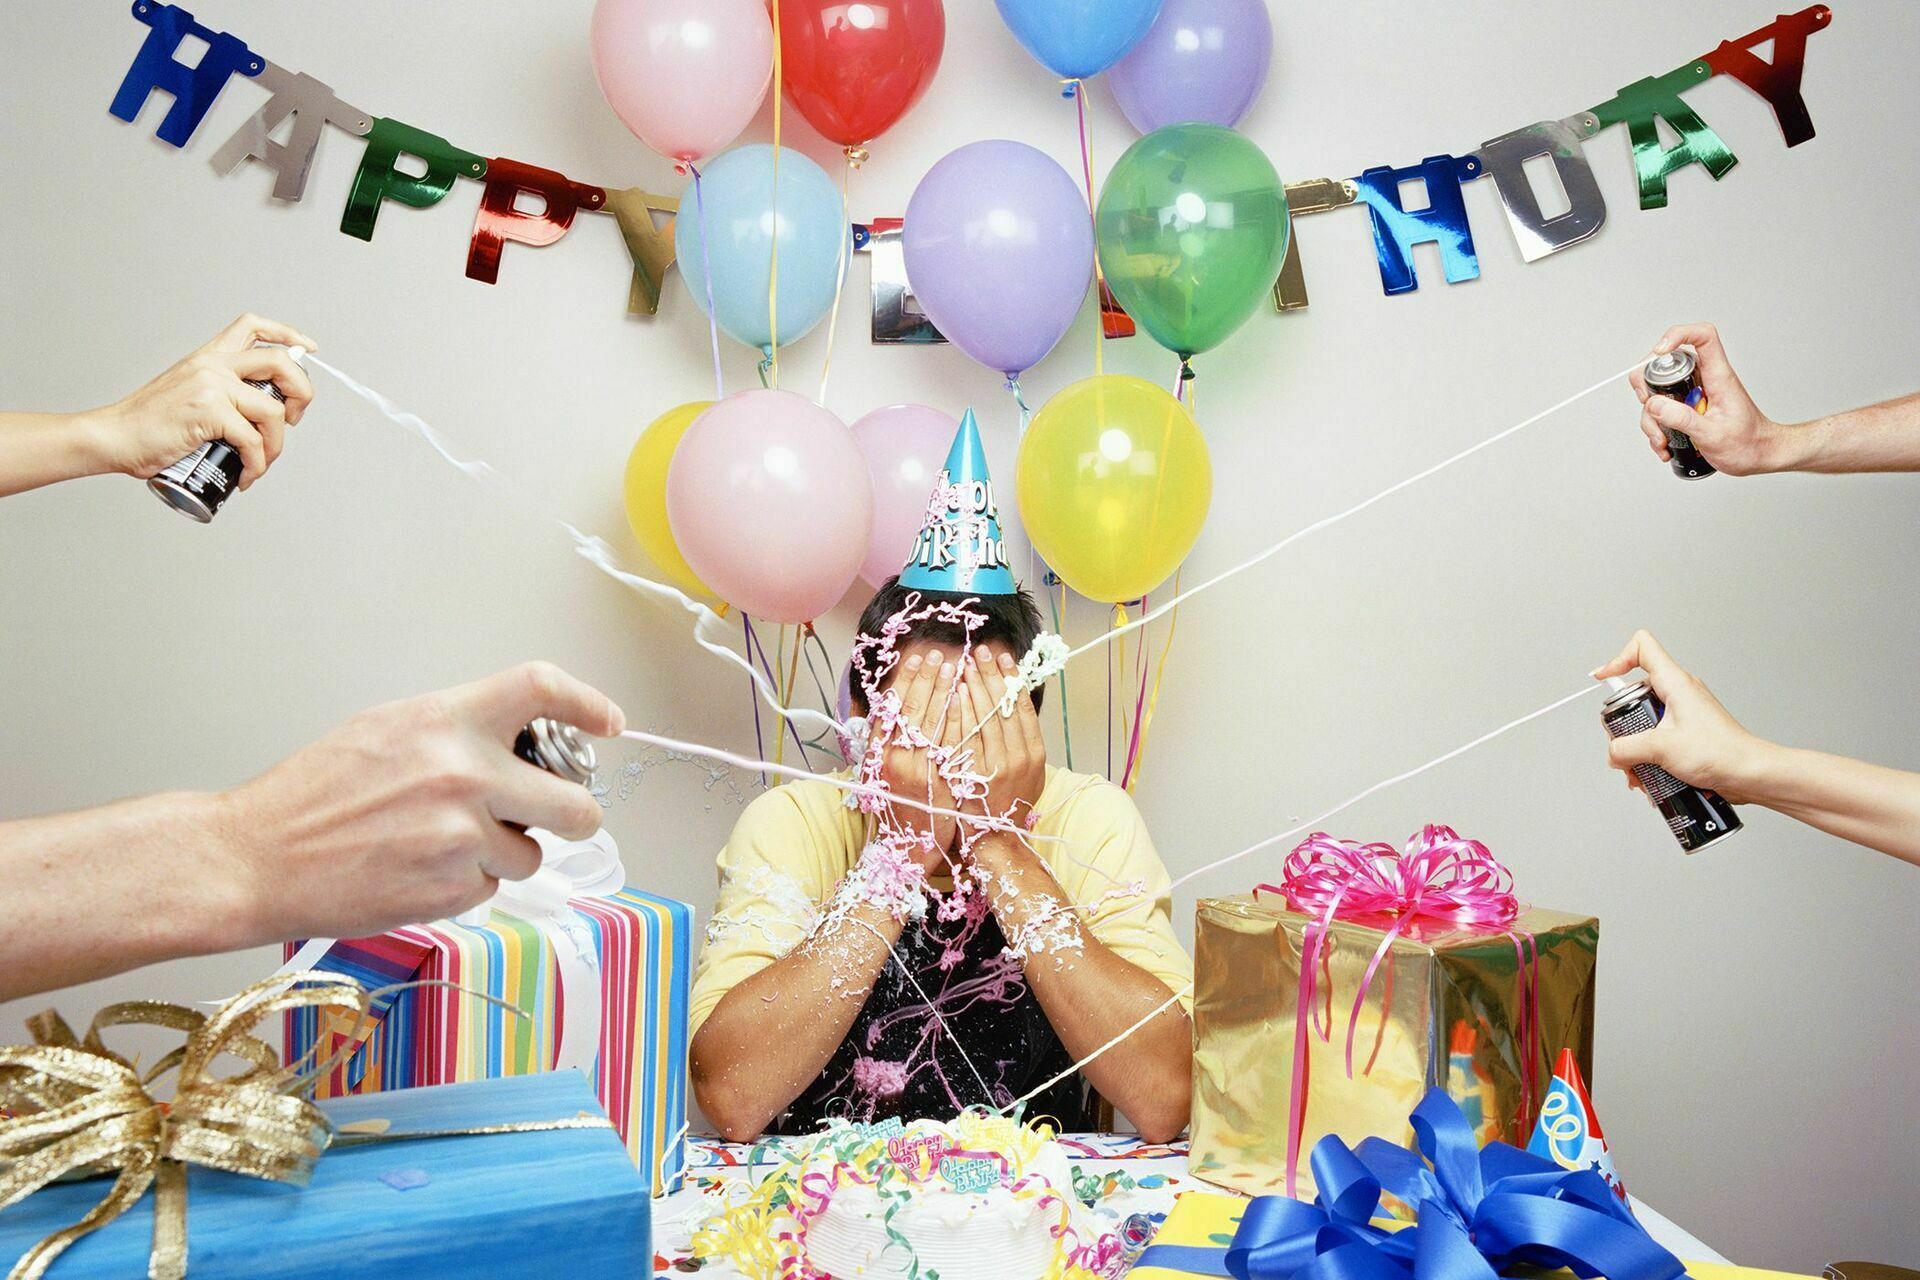 73% of citizens do not like to celebrate their birthday